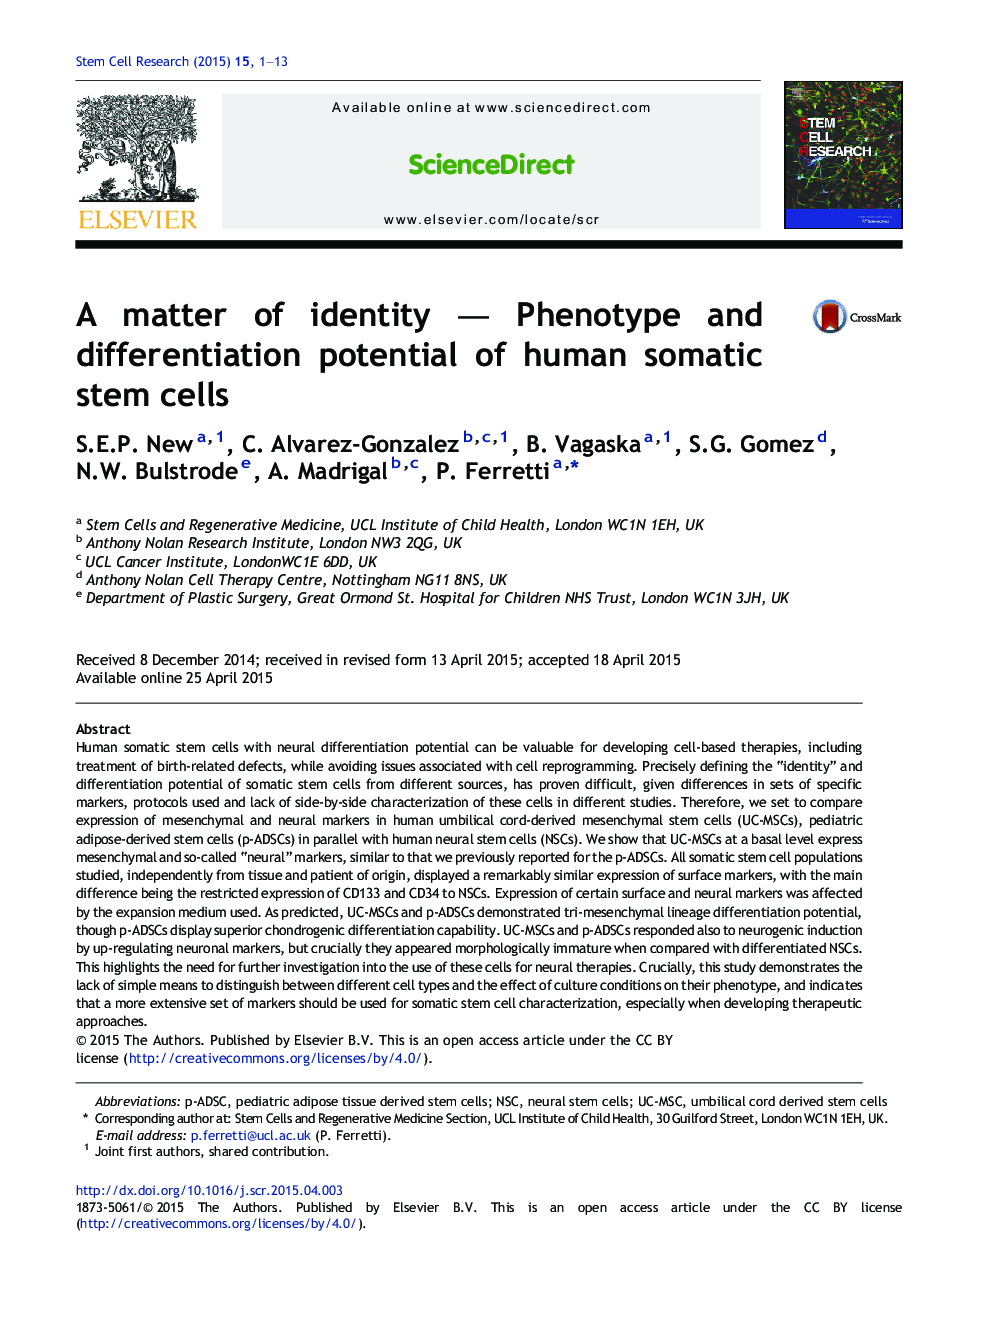 A matter of identity — Phenotype and differentiation potential of human somatic stem cells